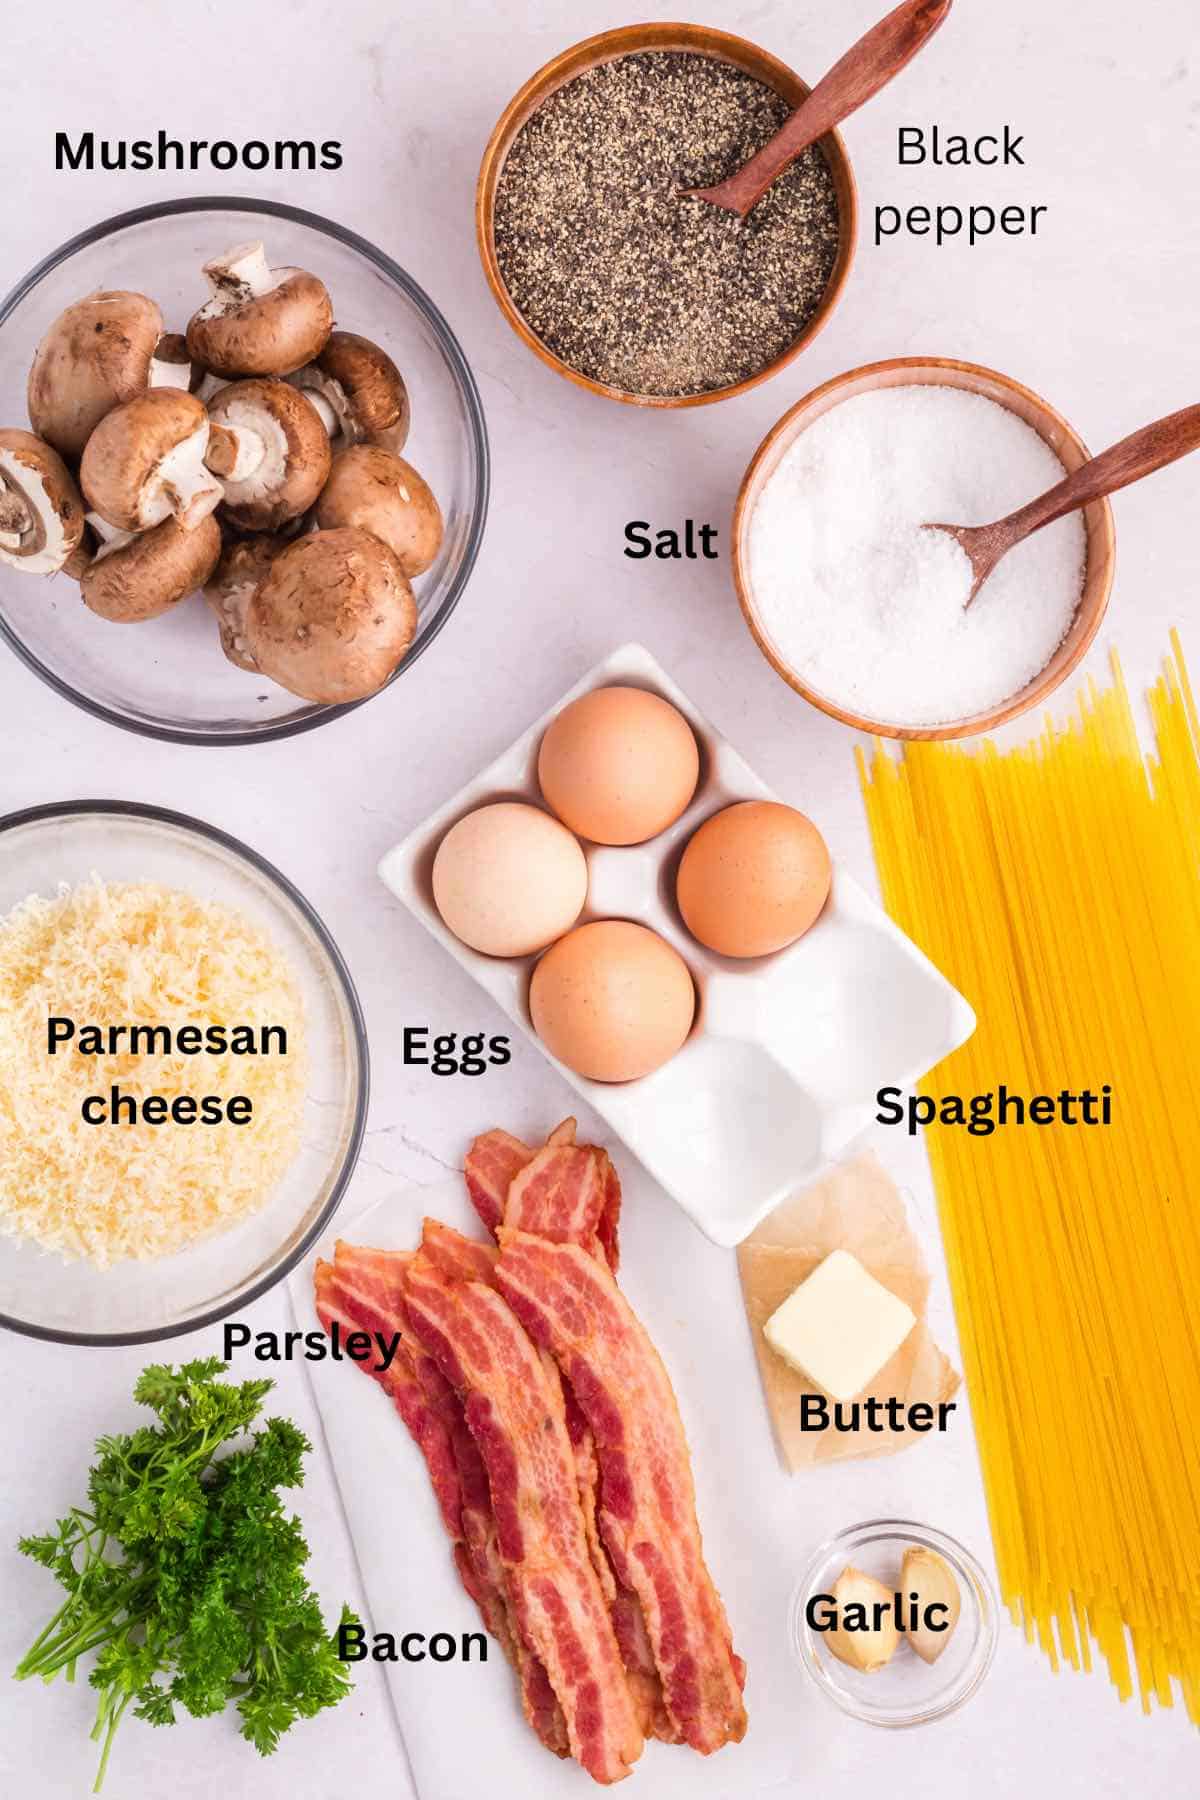 Mushroom carbonara ingredients on a counter include Parmesan cheese, eggs, and spaghetti. 